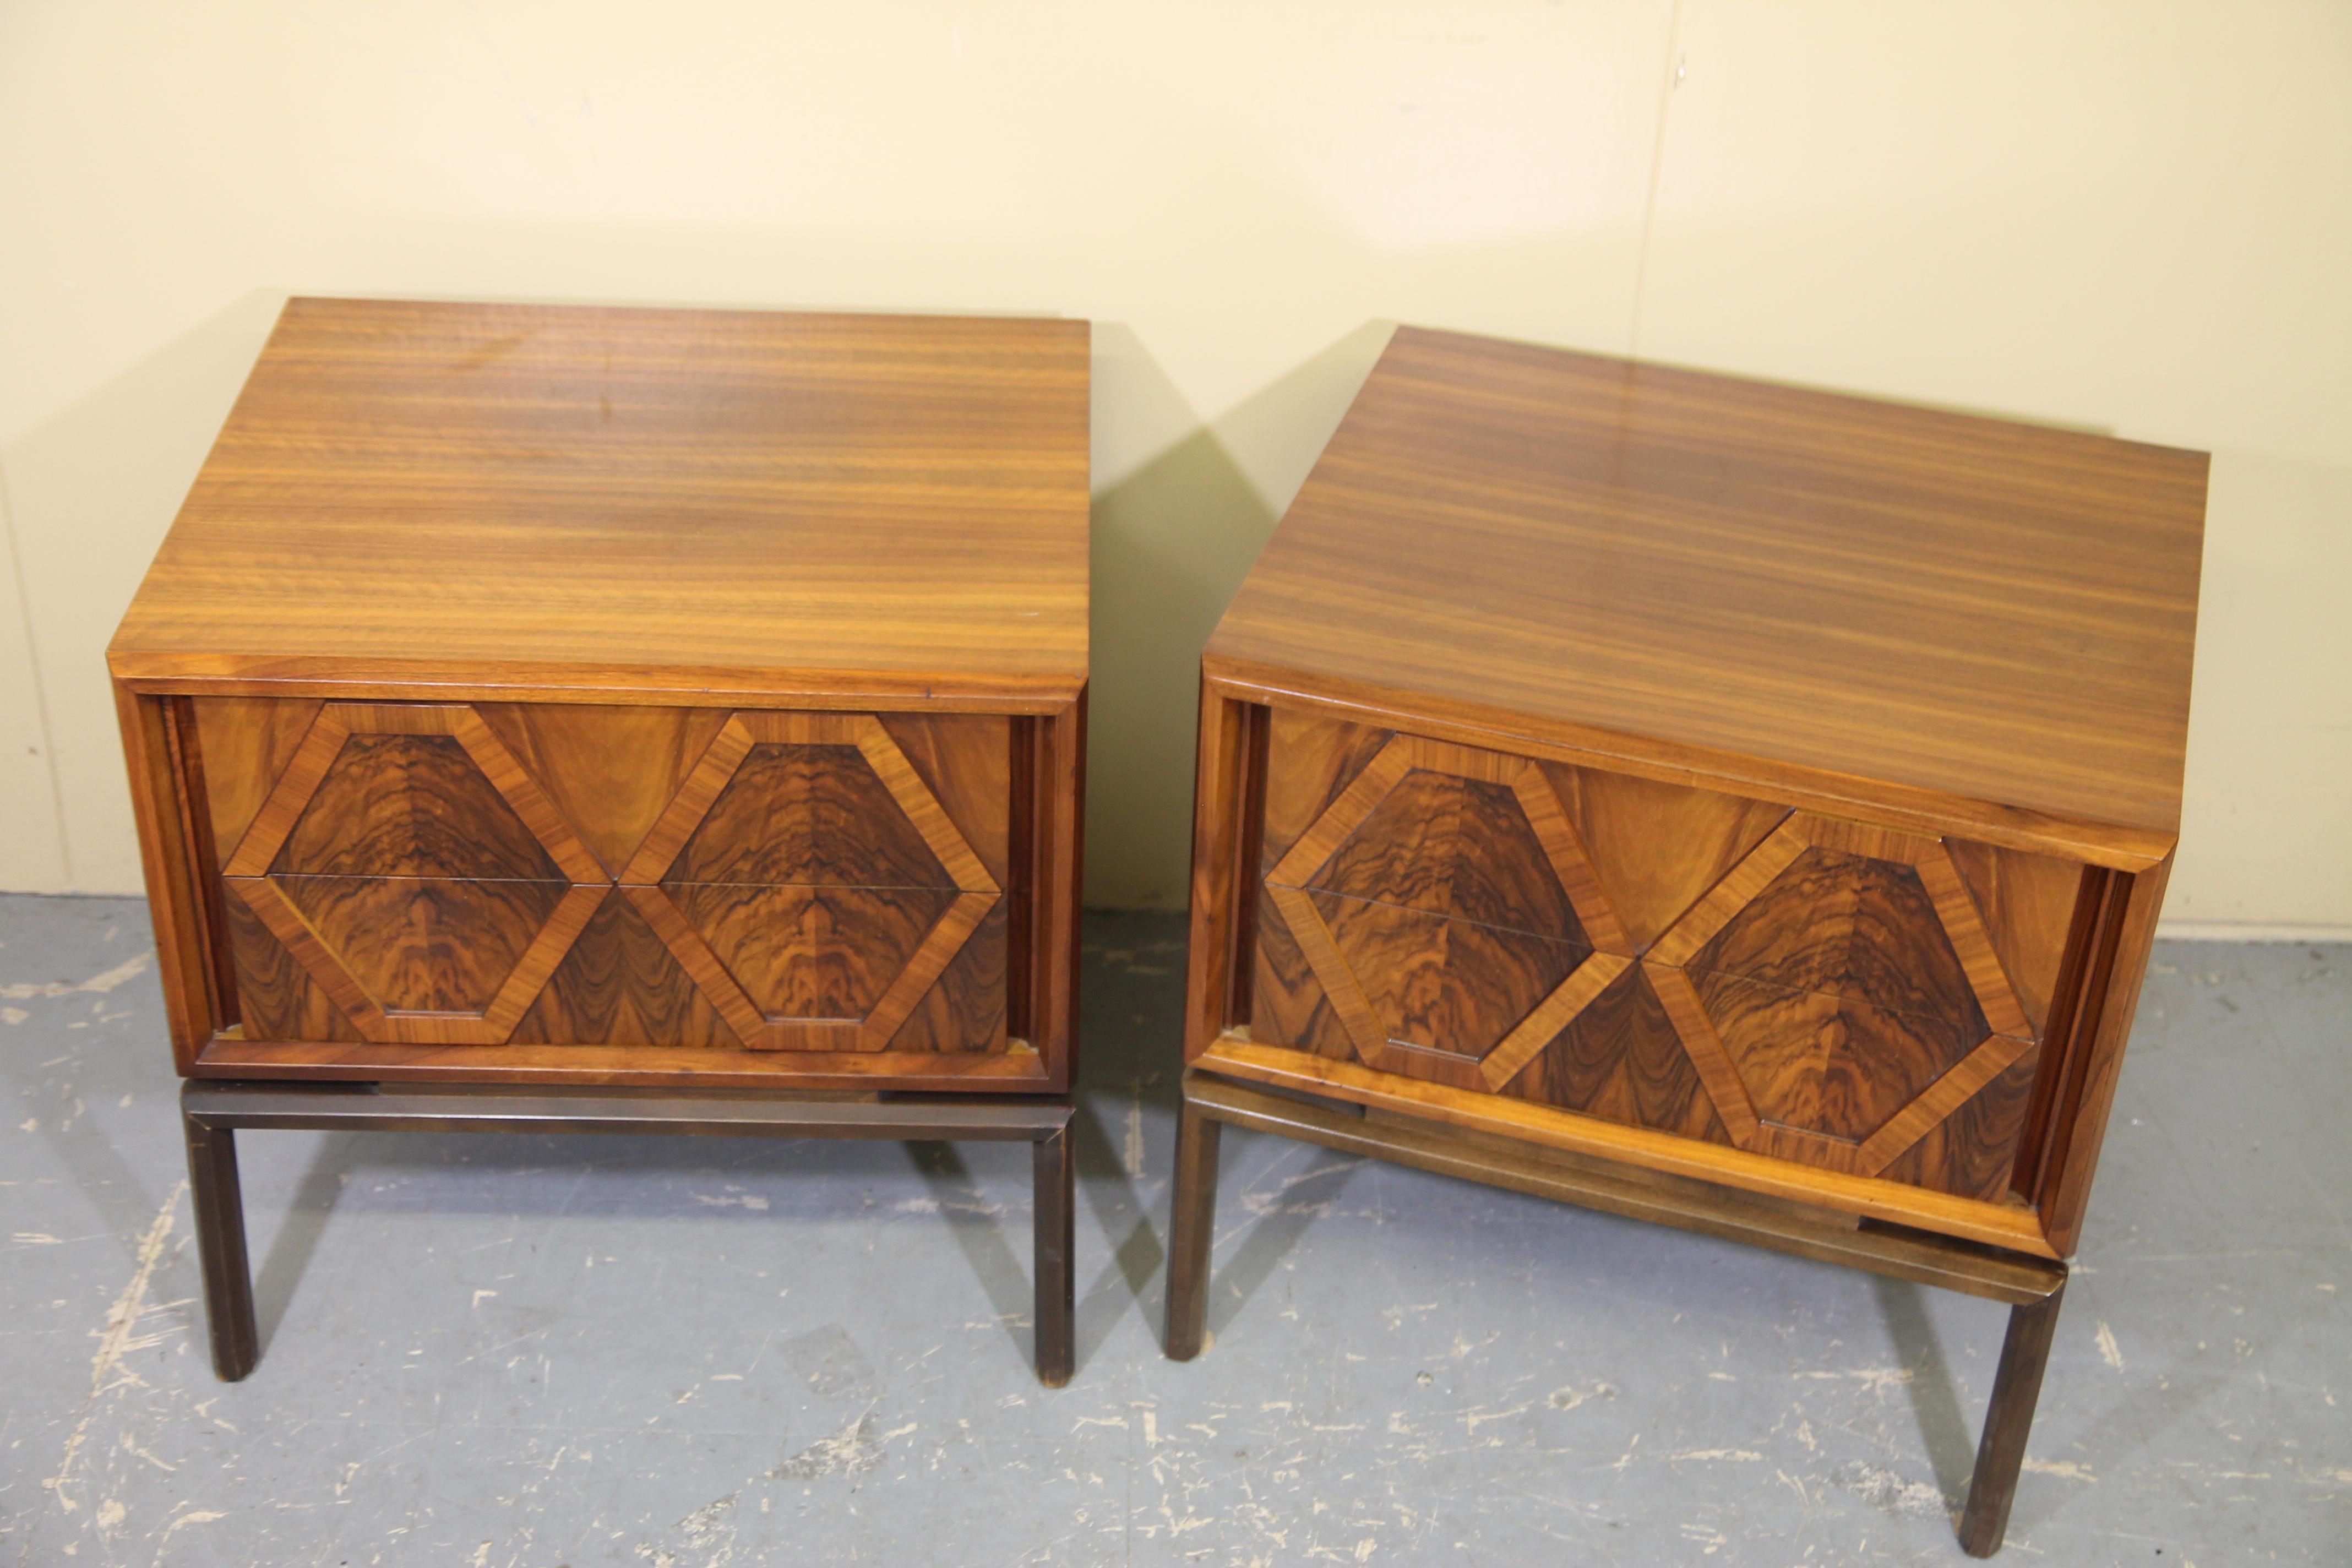 Great pair of Edmund Spence walnut end tables. Table rest on the signature Spence leg design. Tables are in very nice vintage condition with just a few nicks on the legs. I will be listing a small dresser that goes with this set.